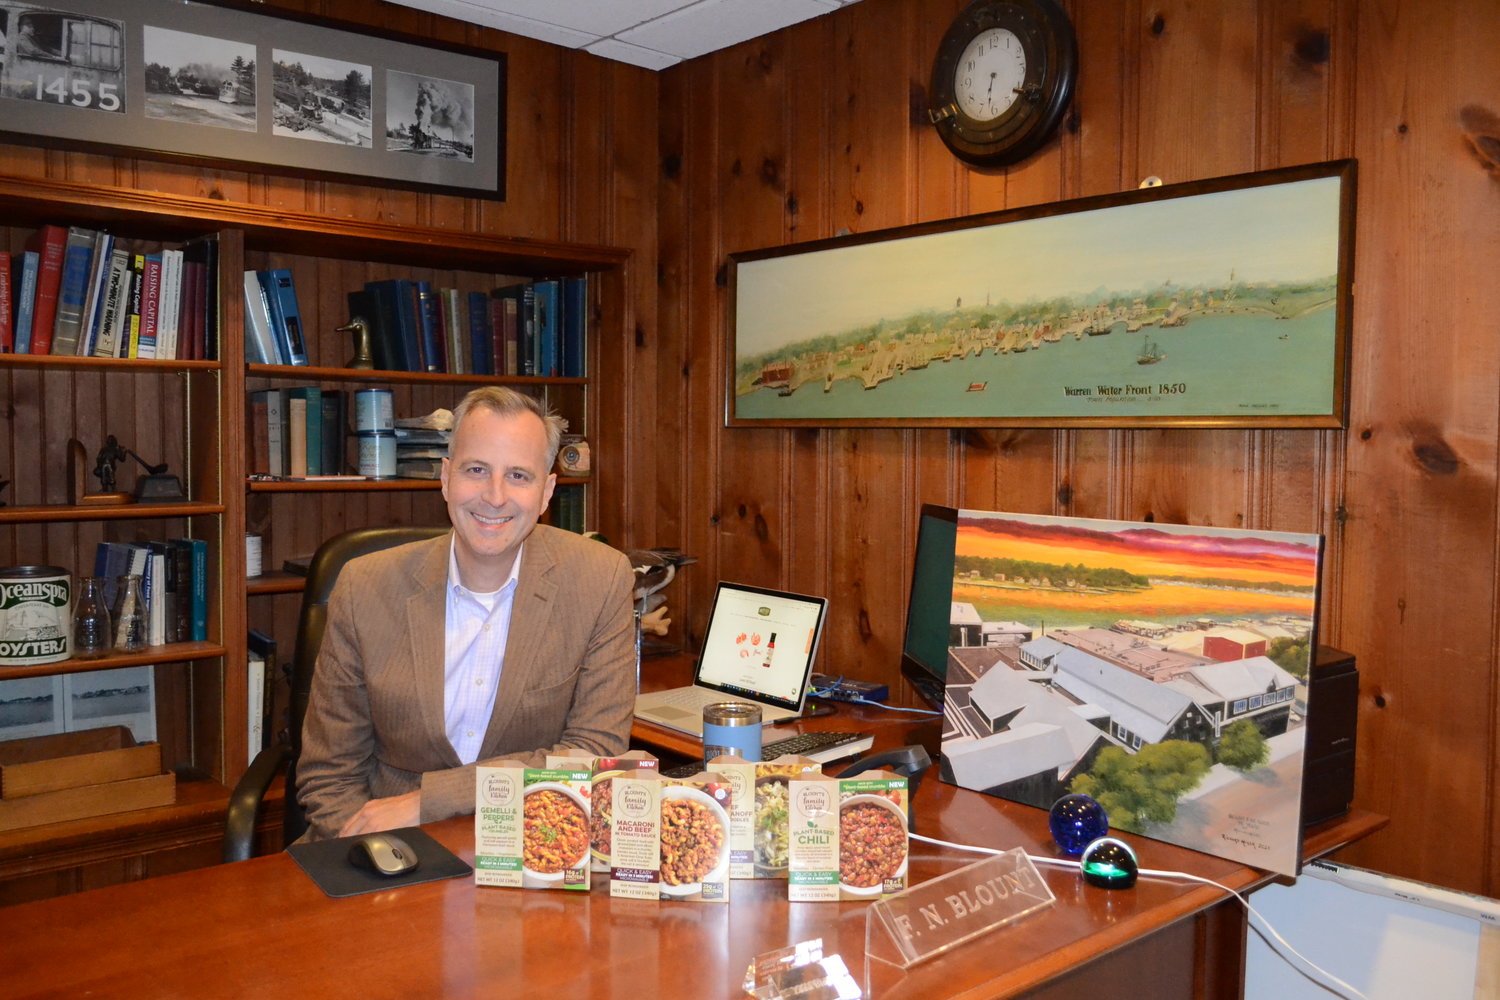 Todd Blount, President and CEO of Blount Fine Foods, is the third generation of his family to run the business since it incorporated in 1946. But the company has deeper roots than that, stretching back five generations to 1880.